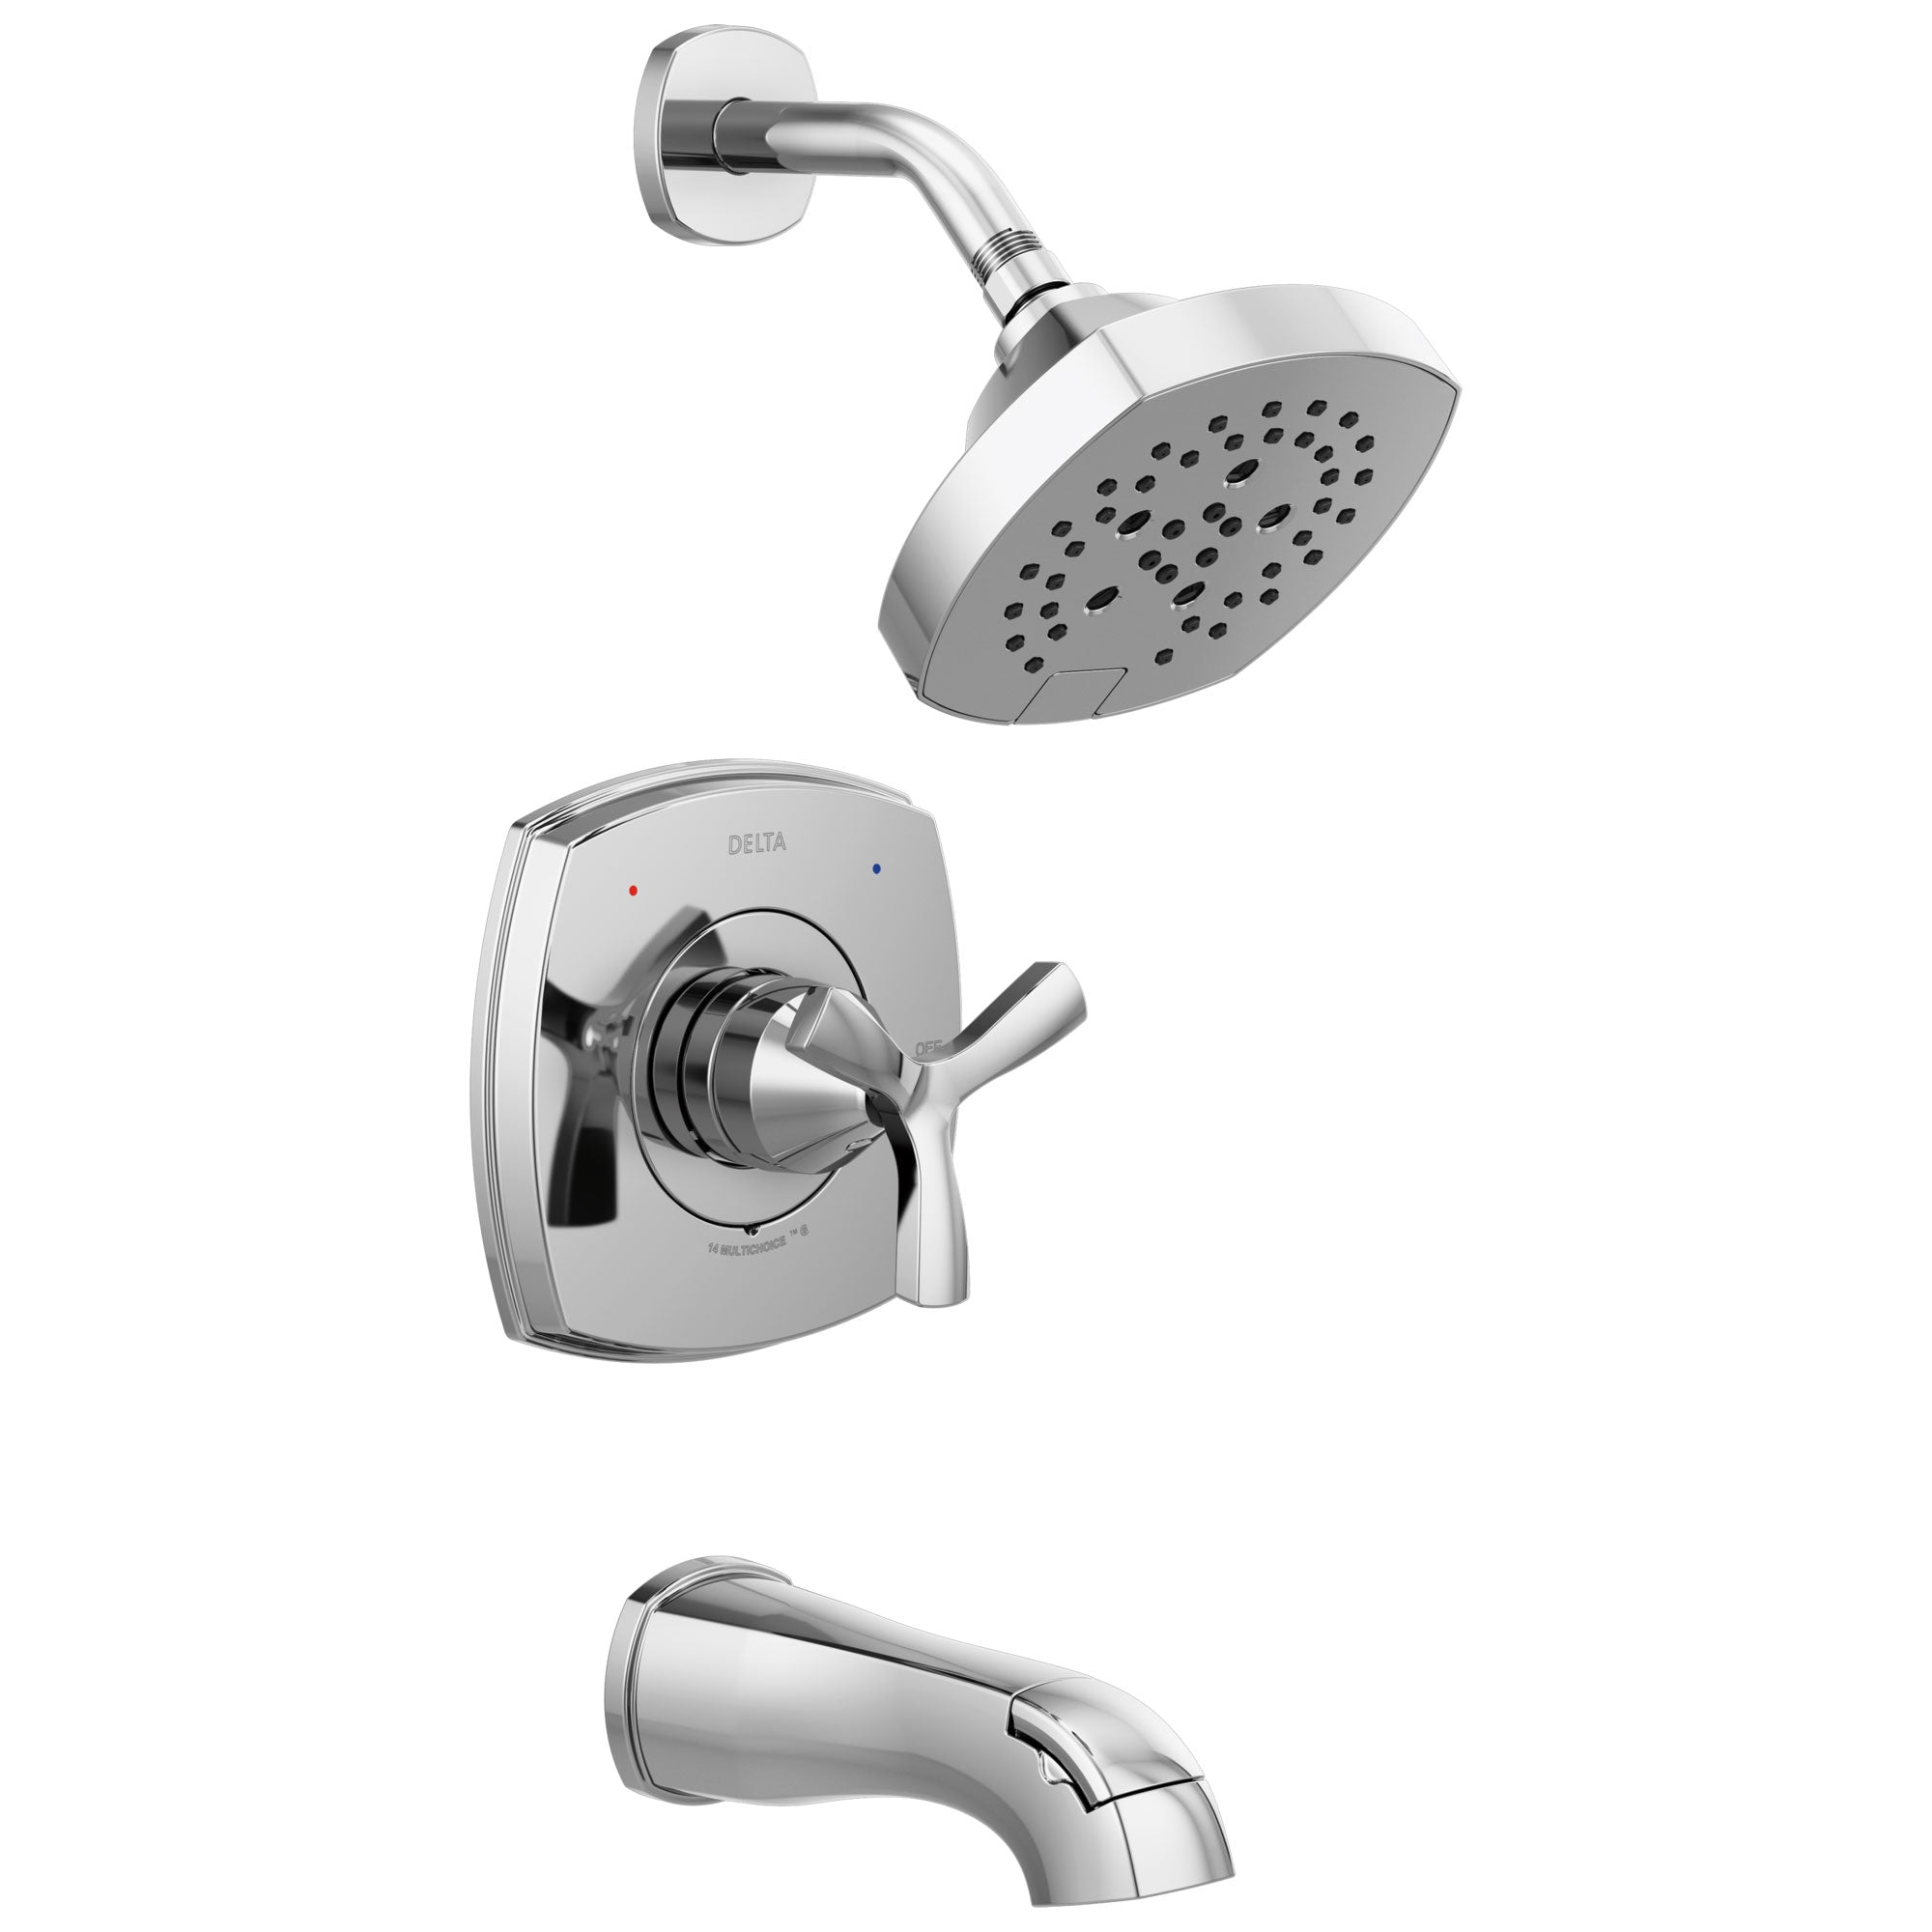 Delta Stryke Chrome Finish 14 Series Cross Handle Tub and Shower Combination Faucet Trim Kit (Requires Valve) DT144766